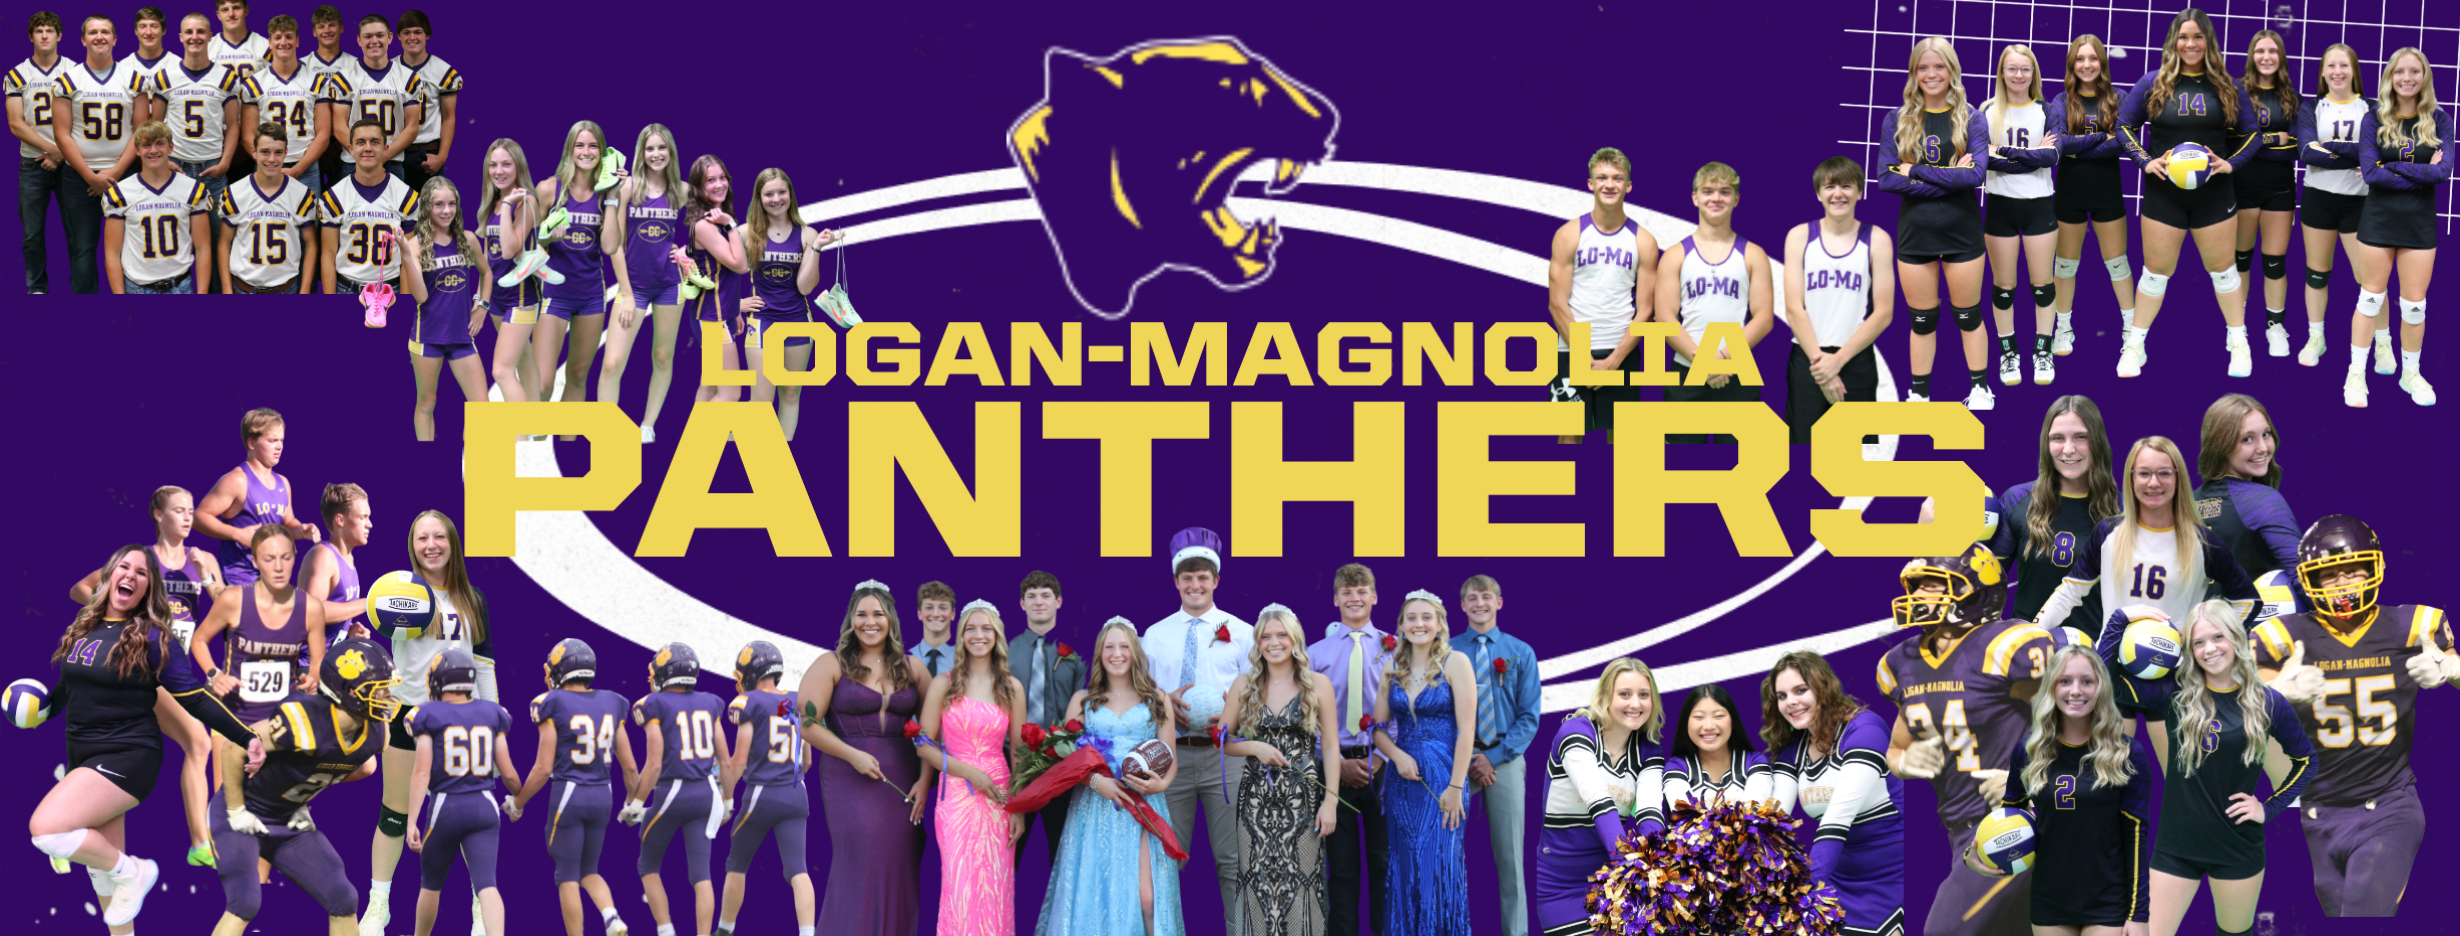 Logan-Magnolia panthers banner with multiple activities